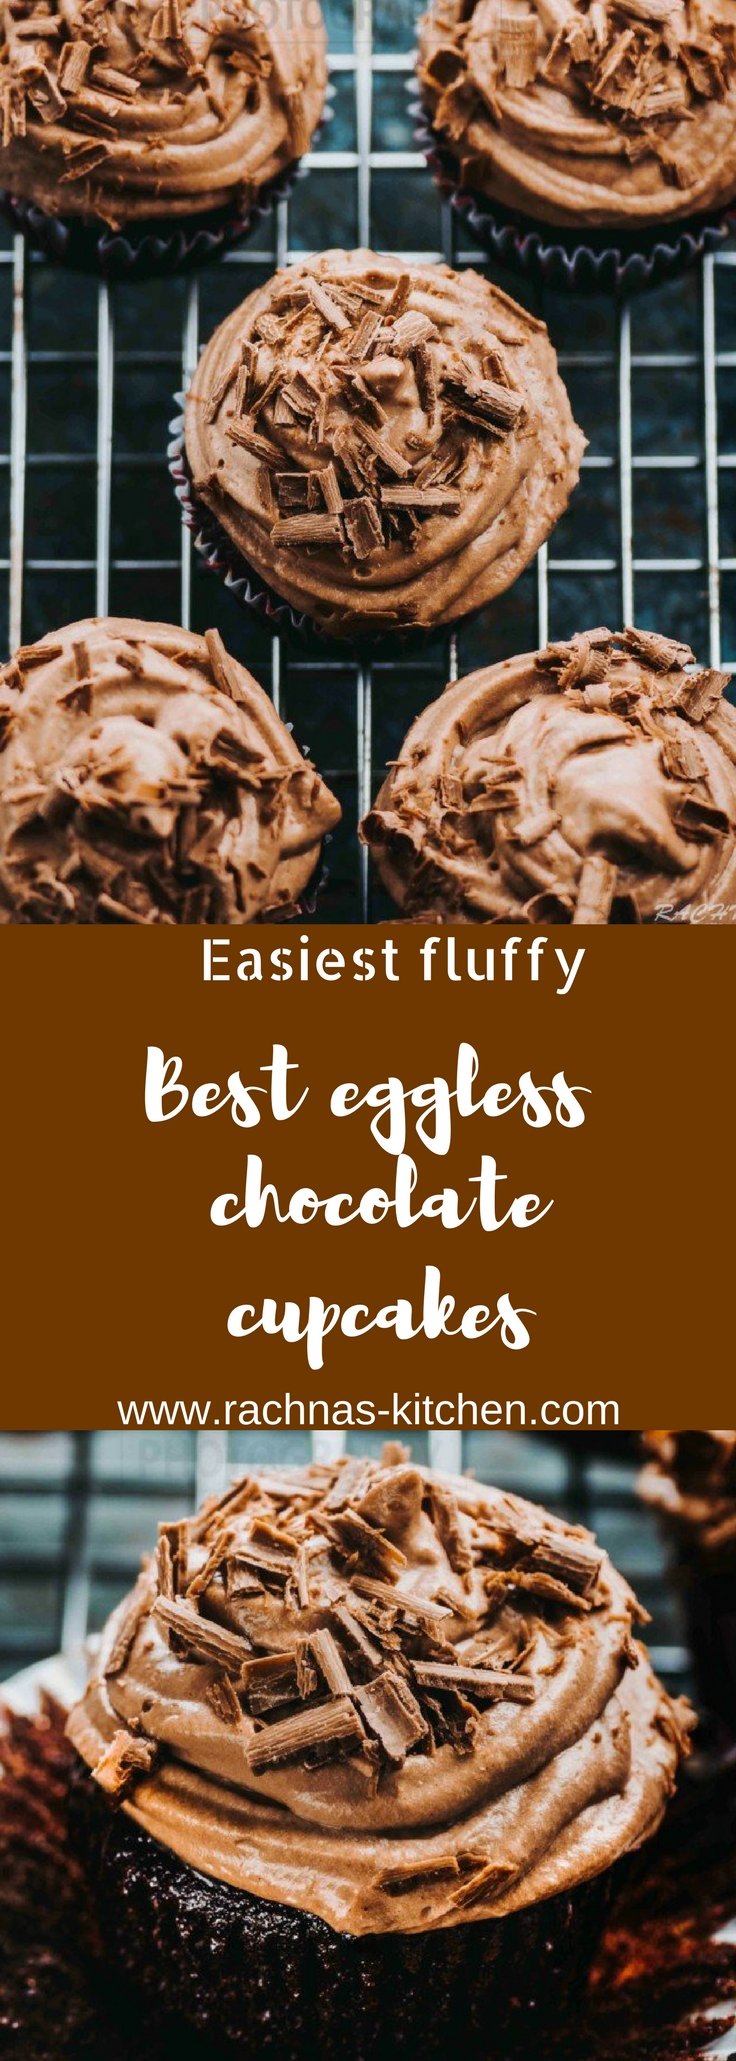 Eggless Chocolate cupcakes with cream cheese frosting 